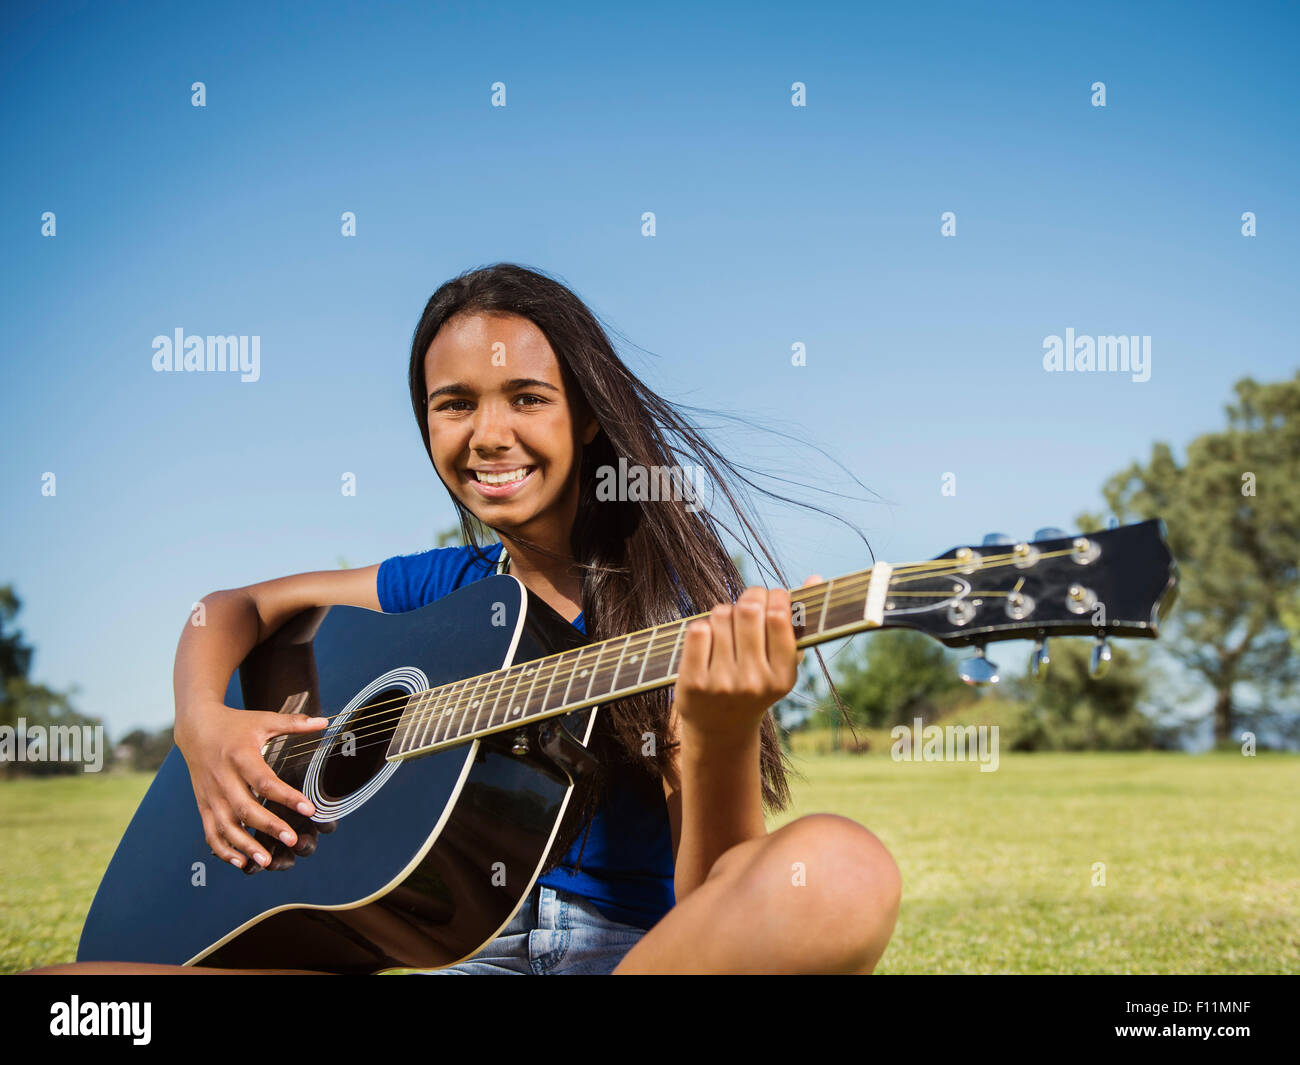 Mixed Race girl playing guitar in park Banque D'Images